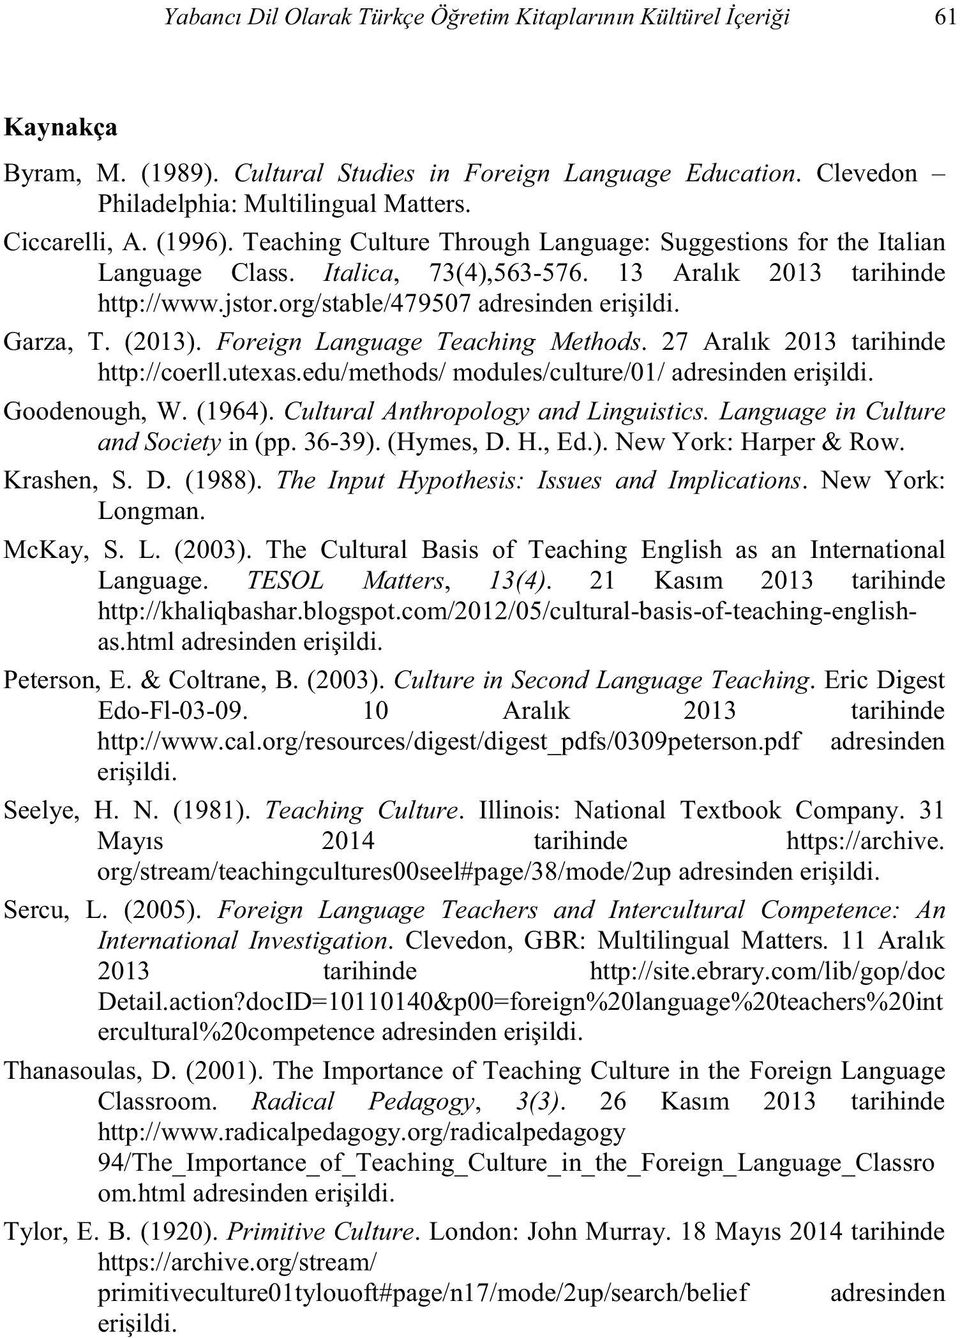 Cultural Anthropology and Linguistics. Language in Culture and Society in (pp. 36-39). (Hymes, D. H., Ed.). New York: Harper & Row. Krashen, S. D. (1988).